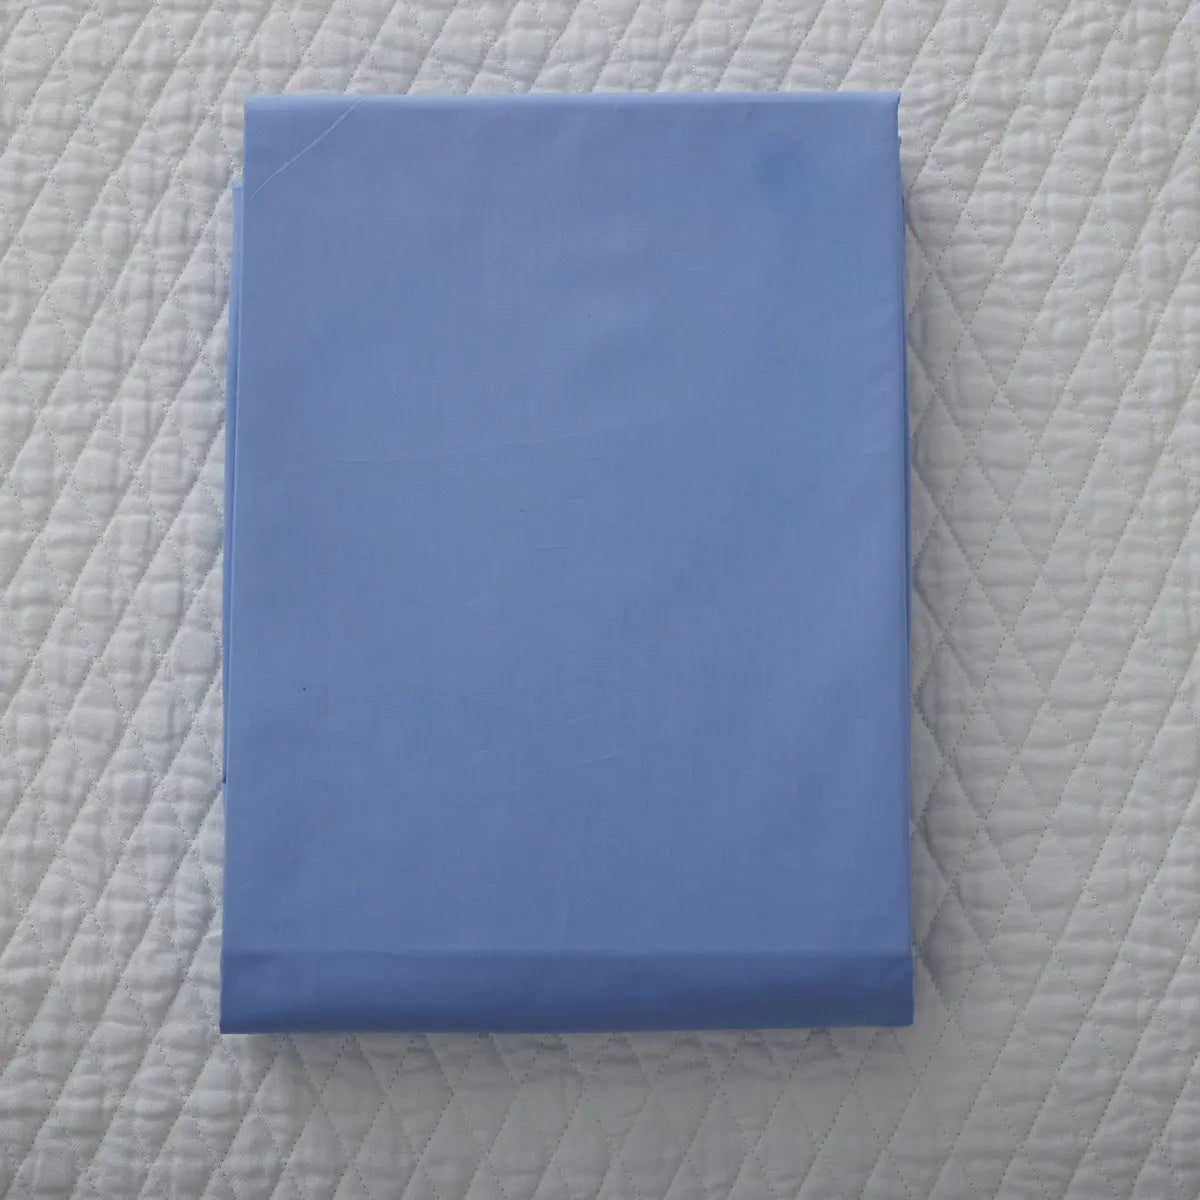 Gracious Home Bali Fitted Sheet in "In Your Eyes" Blue color on a bed